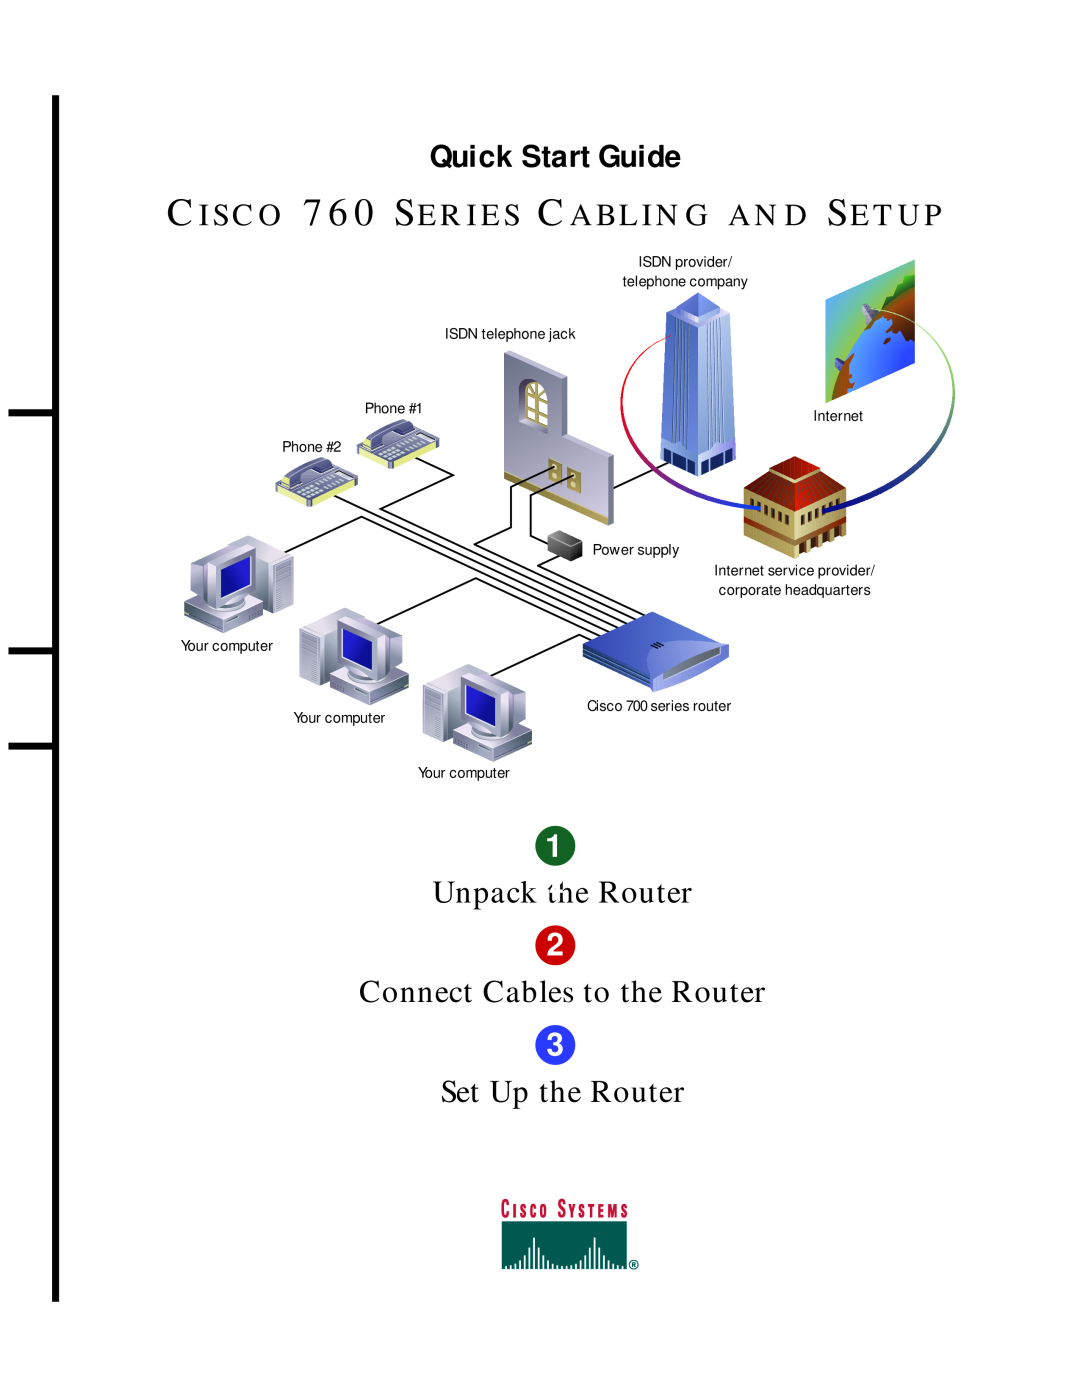 Cisco Systems 760 quick start Quick Start Guide, Unpack the Router, Connect Cables to the Router, Set Up the Router 